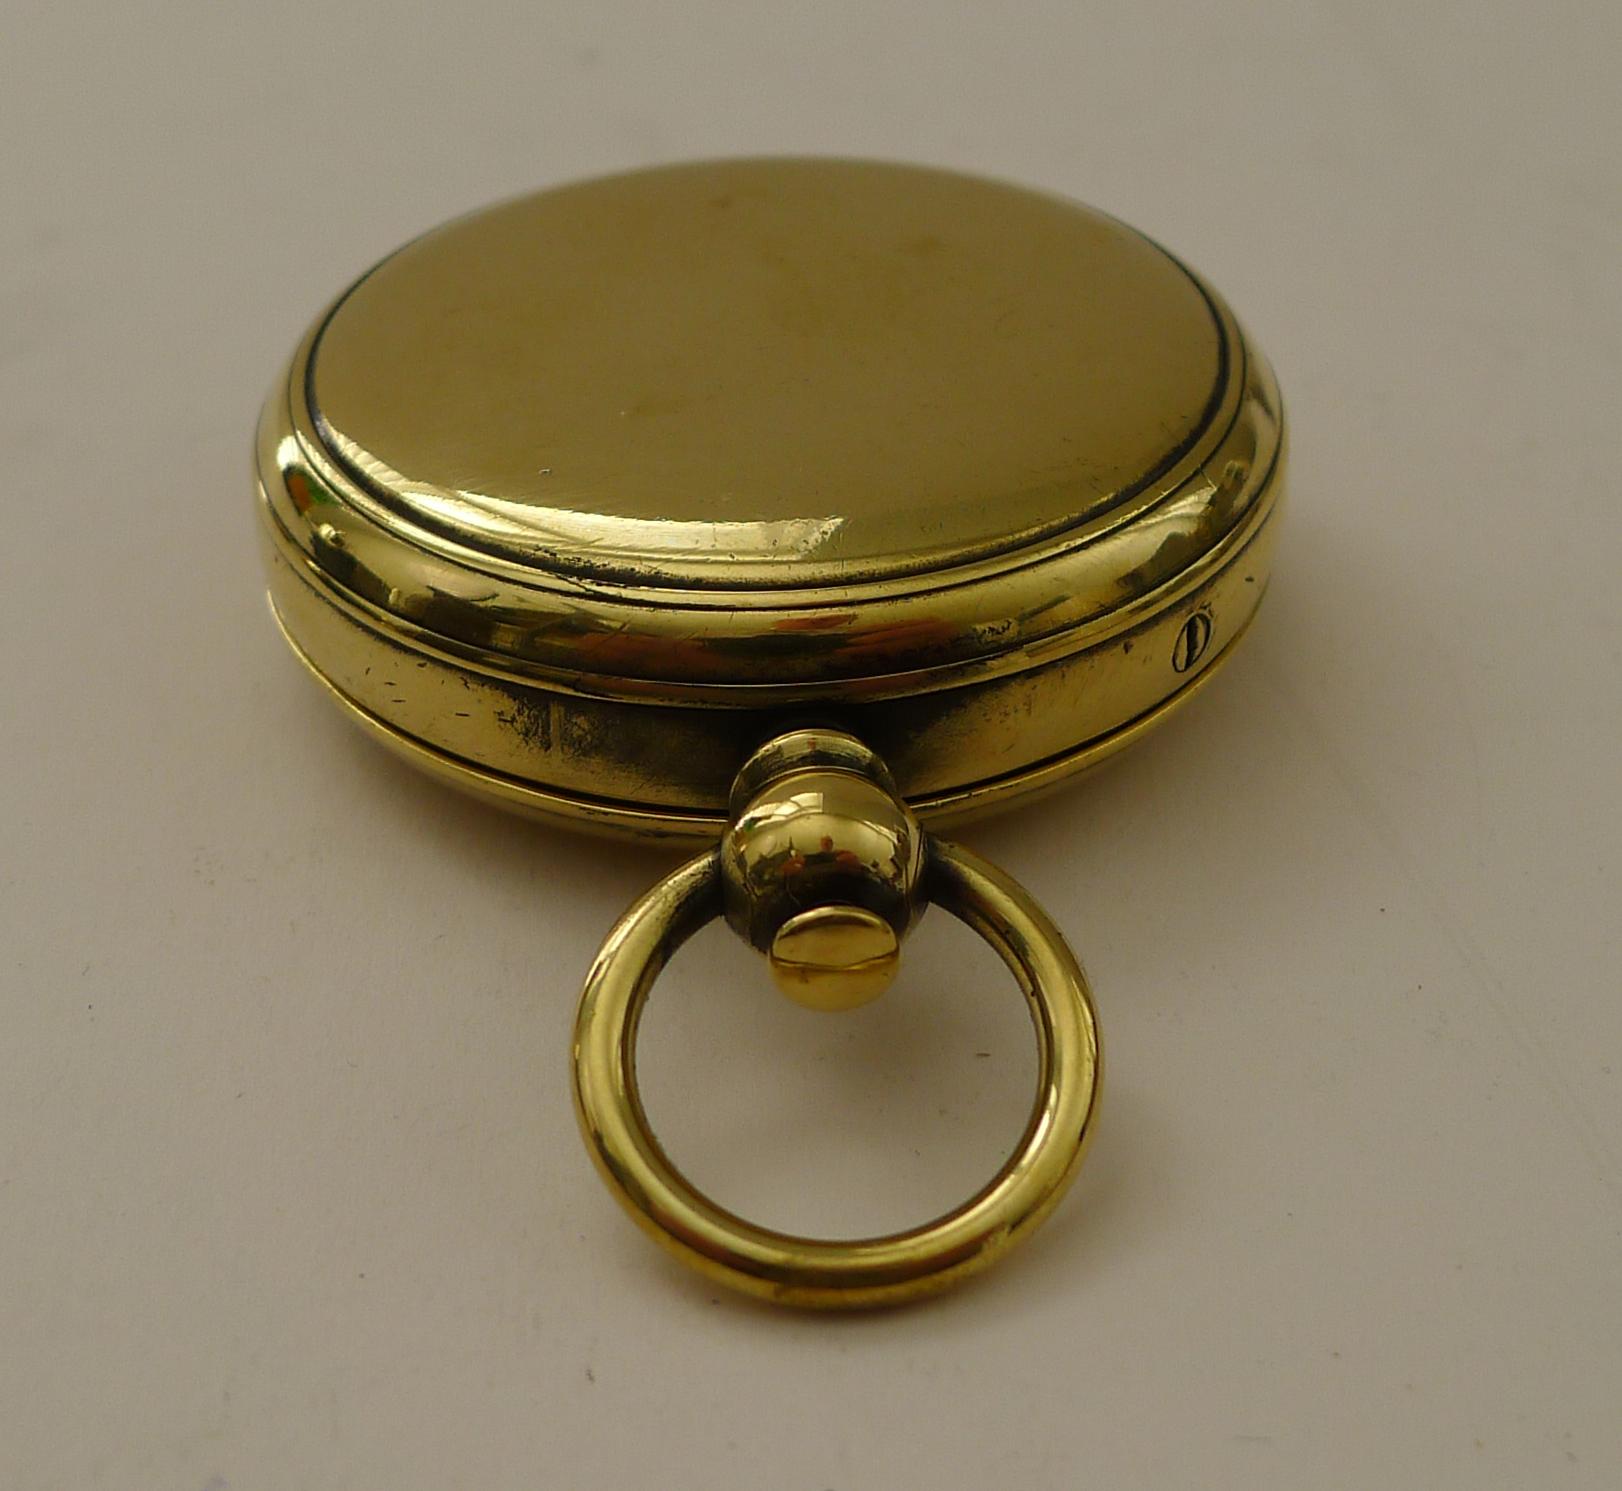 British Antique English Brass Cased Compass Reg. No. For 1903 For Sale